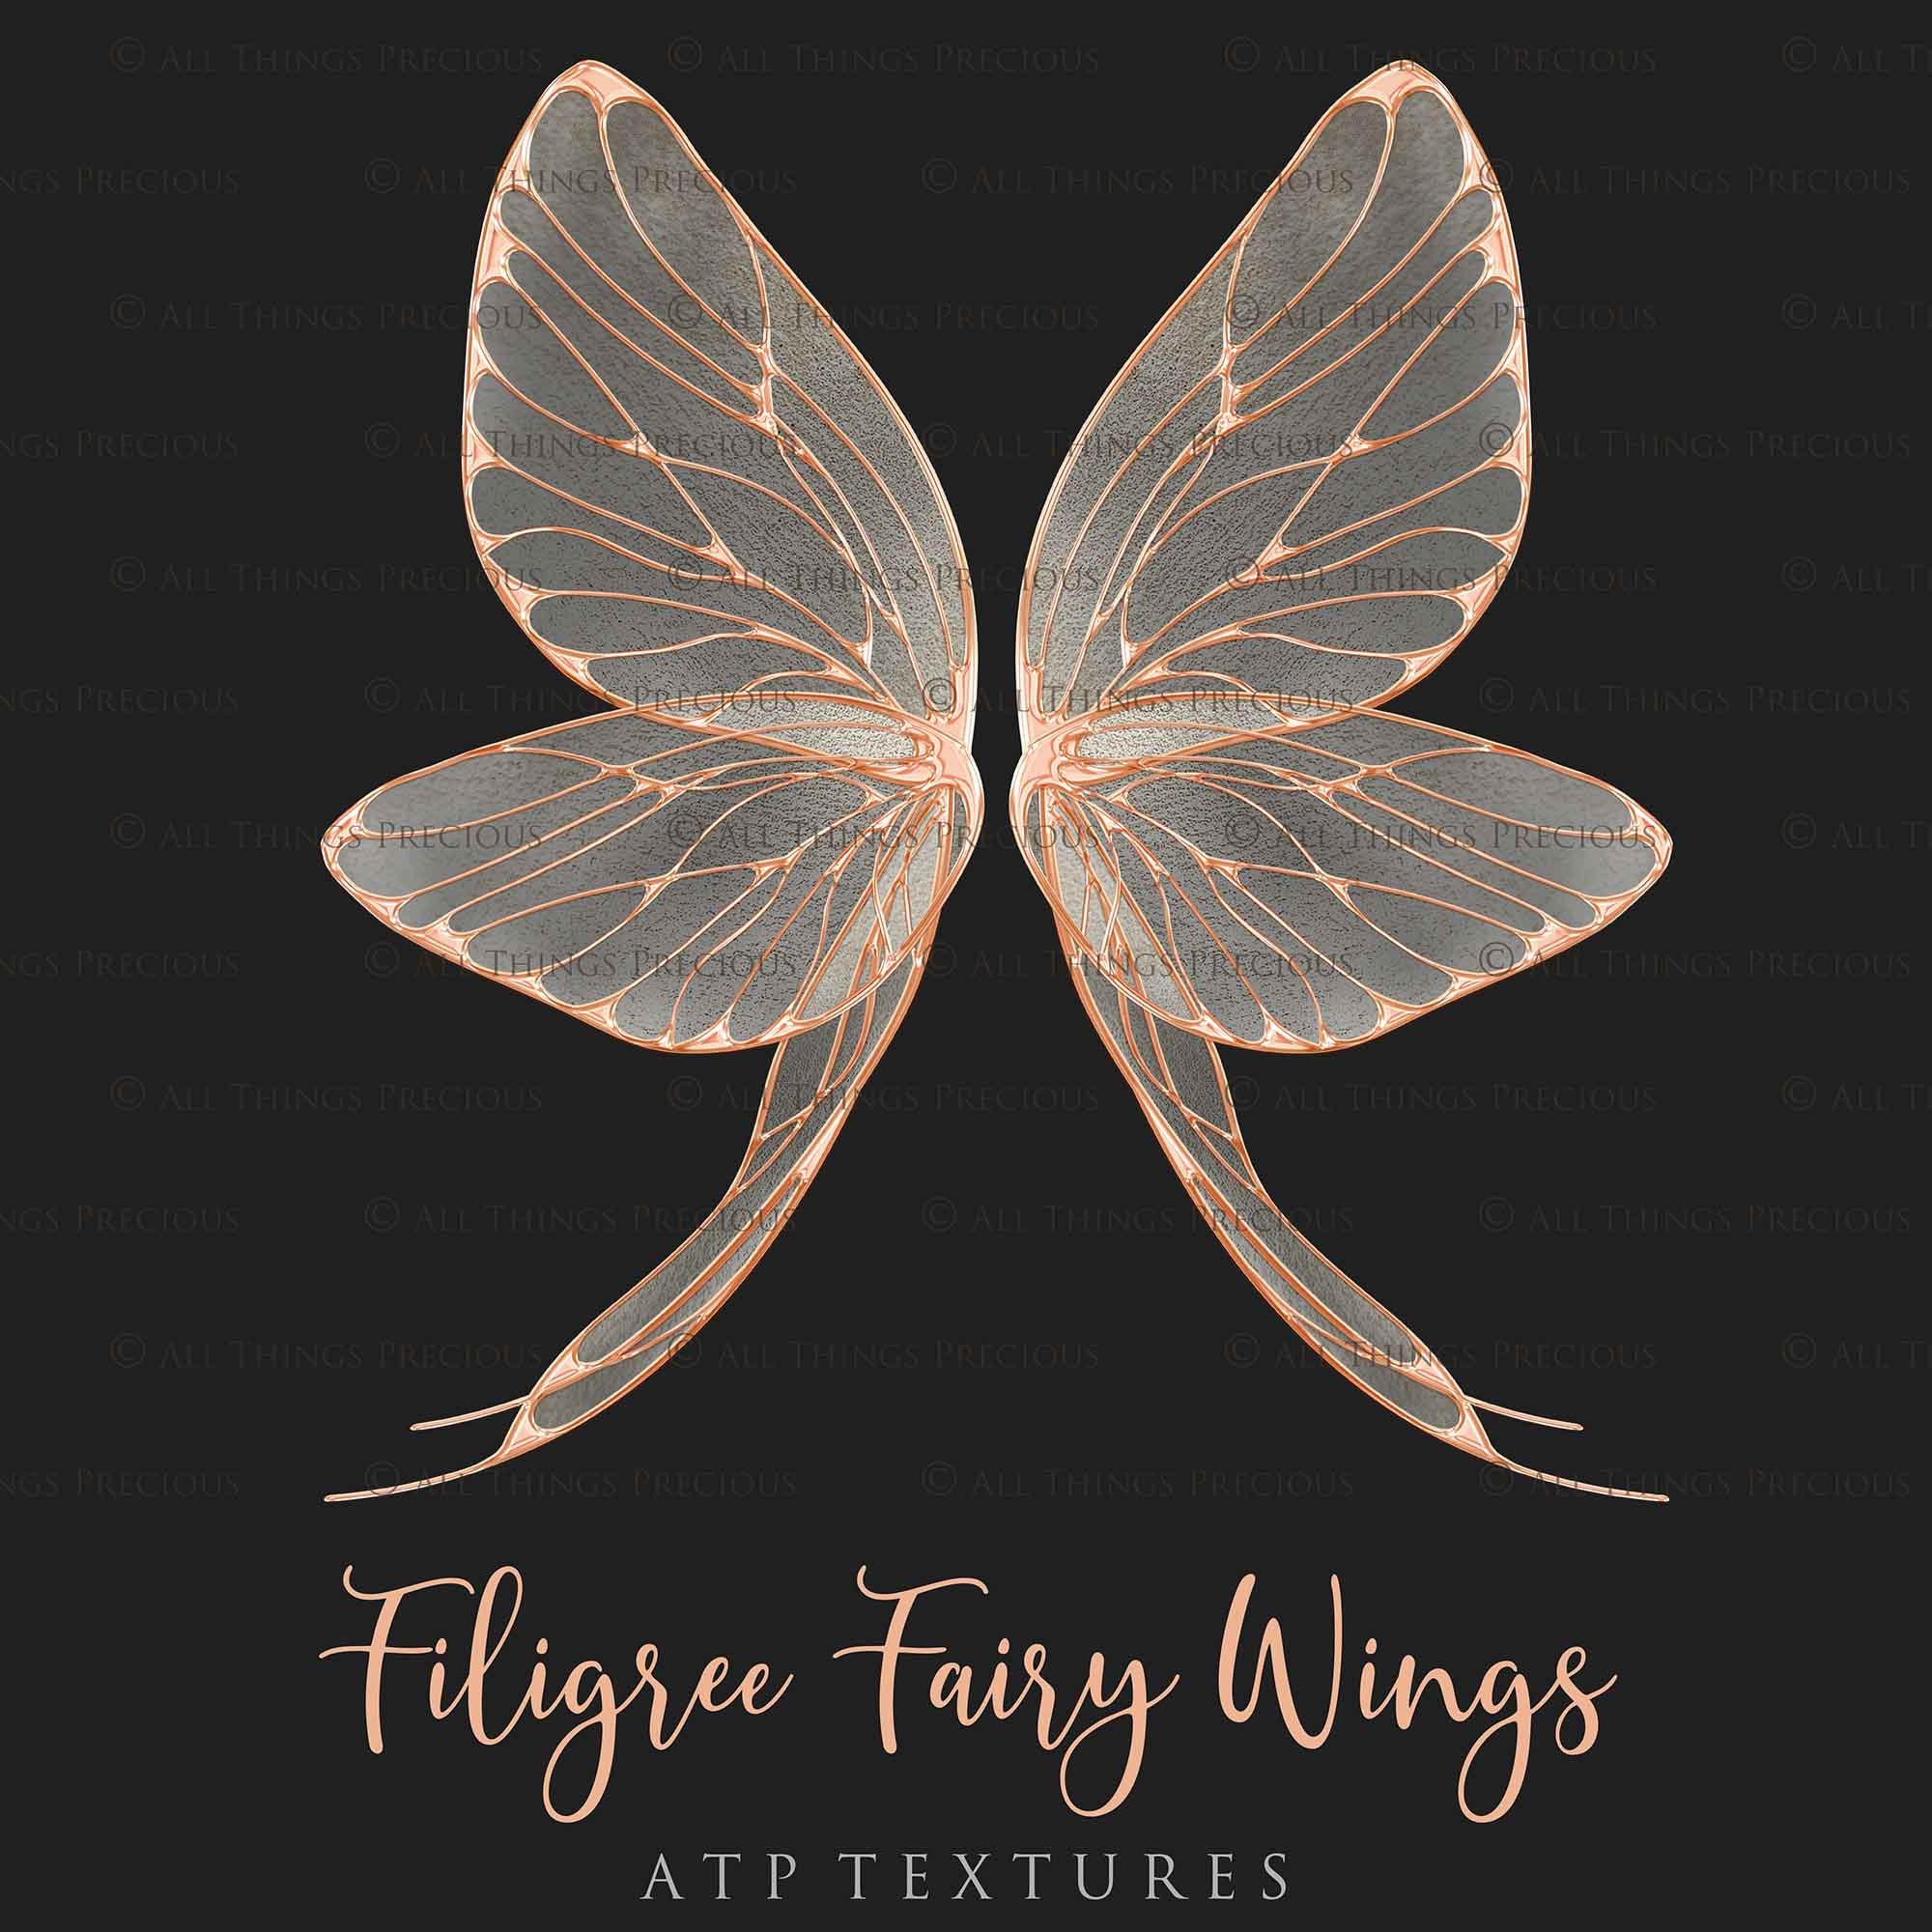 Png transparent Fairy Wing Overlays For Photographers, Photoshop, Digital art and Creatives. Transparent, high resolution, faery wings for photography! These are gorgeous PNG overlays for fantasy digital art and Child portraiture. These are white fairy wings. Graphic digital assets for design. Atp Textures